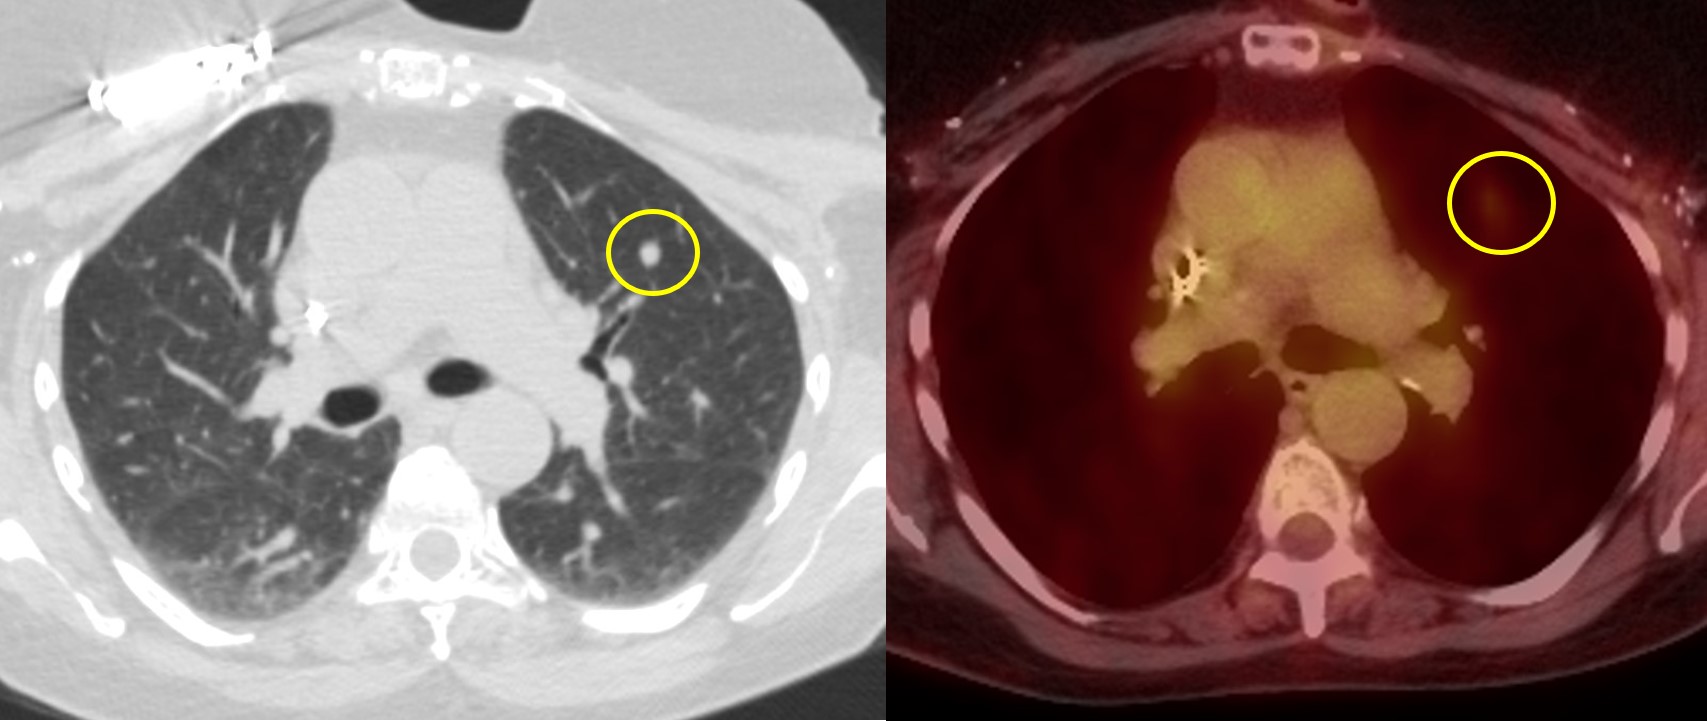 Previously treated papillary thyroid carcinoma with metastatic lung nodule without significant FDG uptake 